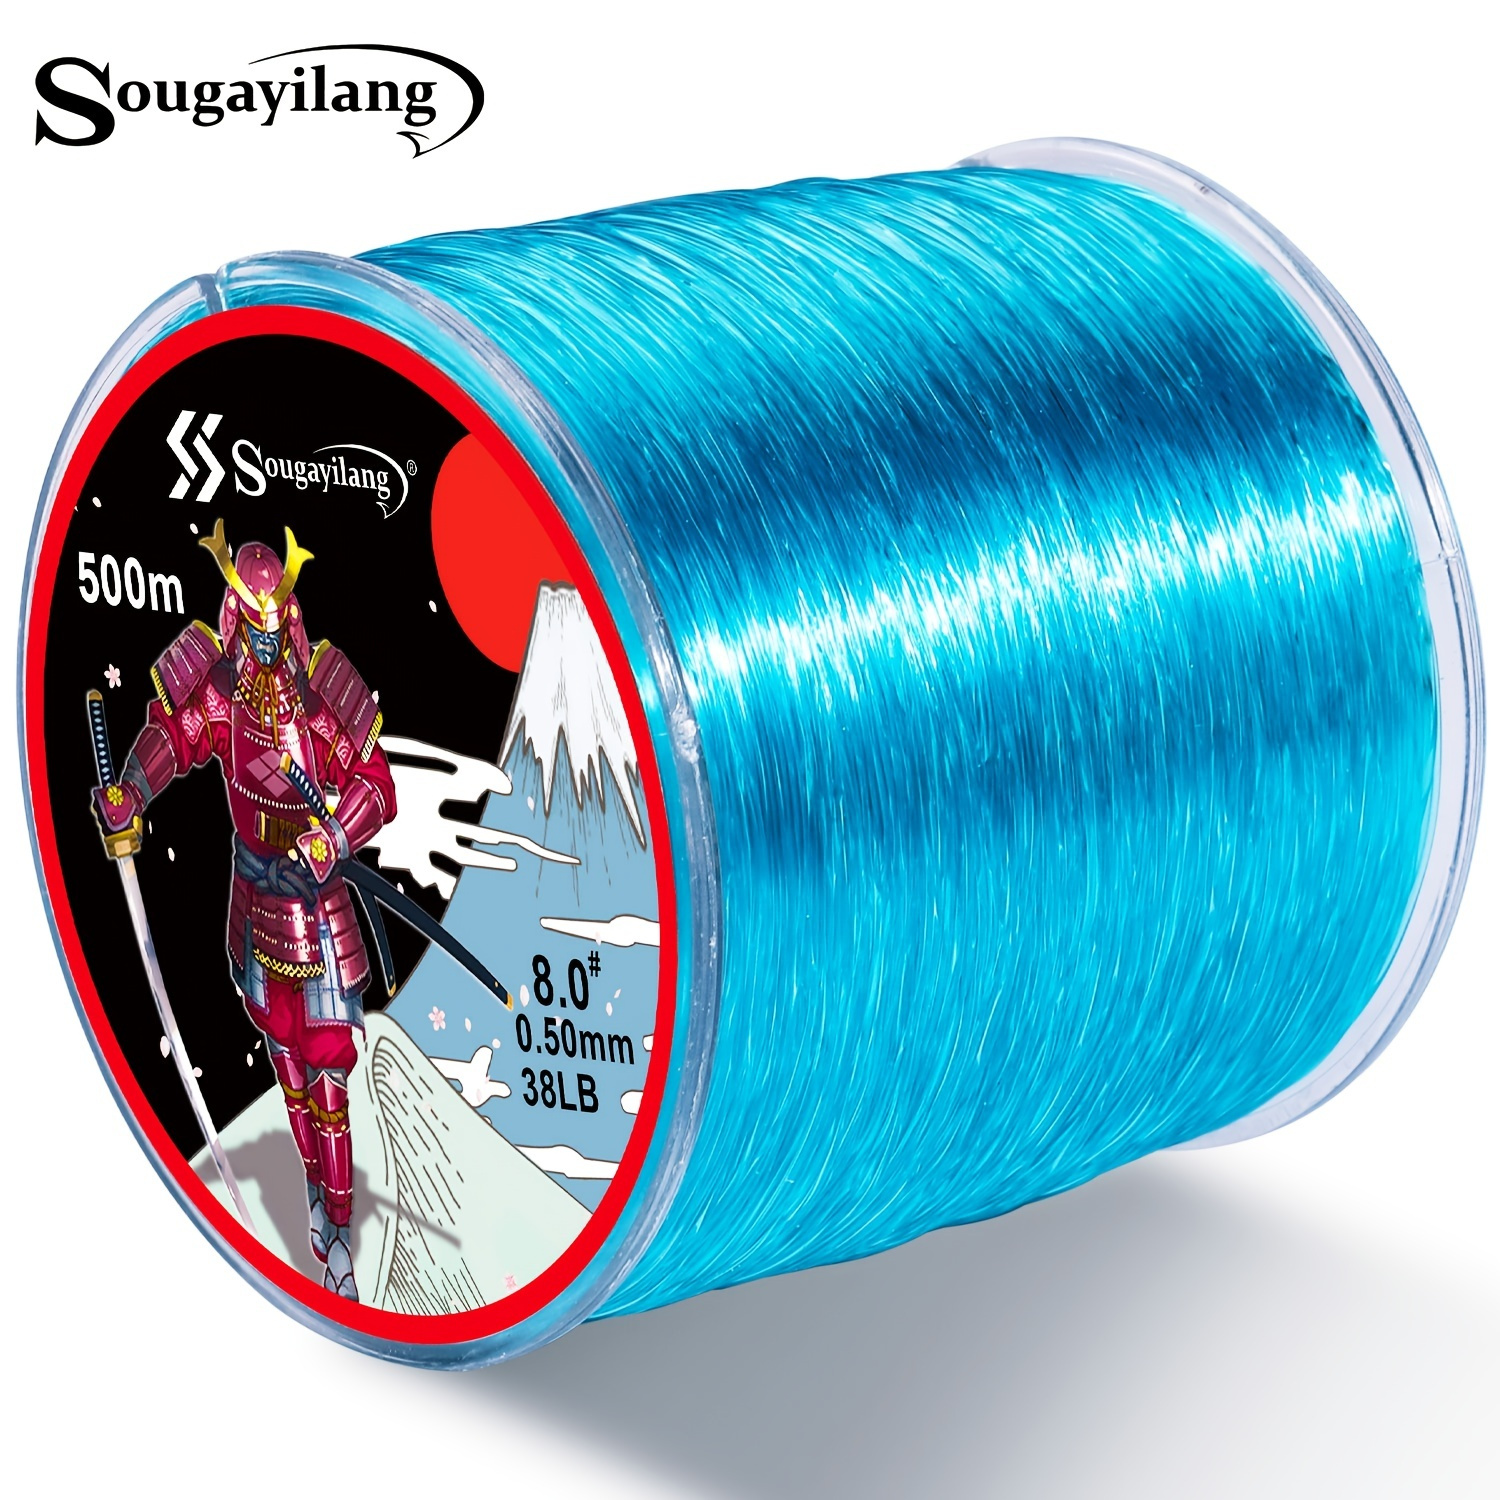 

Sougayilang 4x Monofilament Nylon Fishing Line - Strong, Smooth, And Abrasion Resistant String For Freshwater And Saltwater Fishing